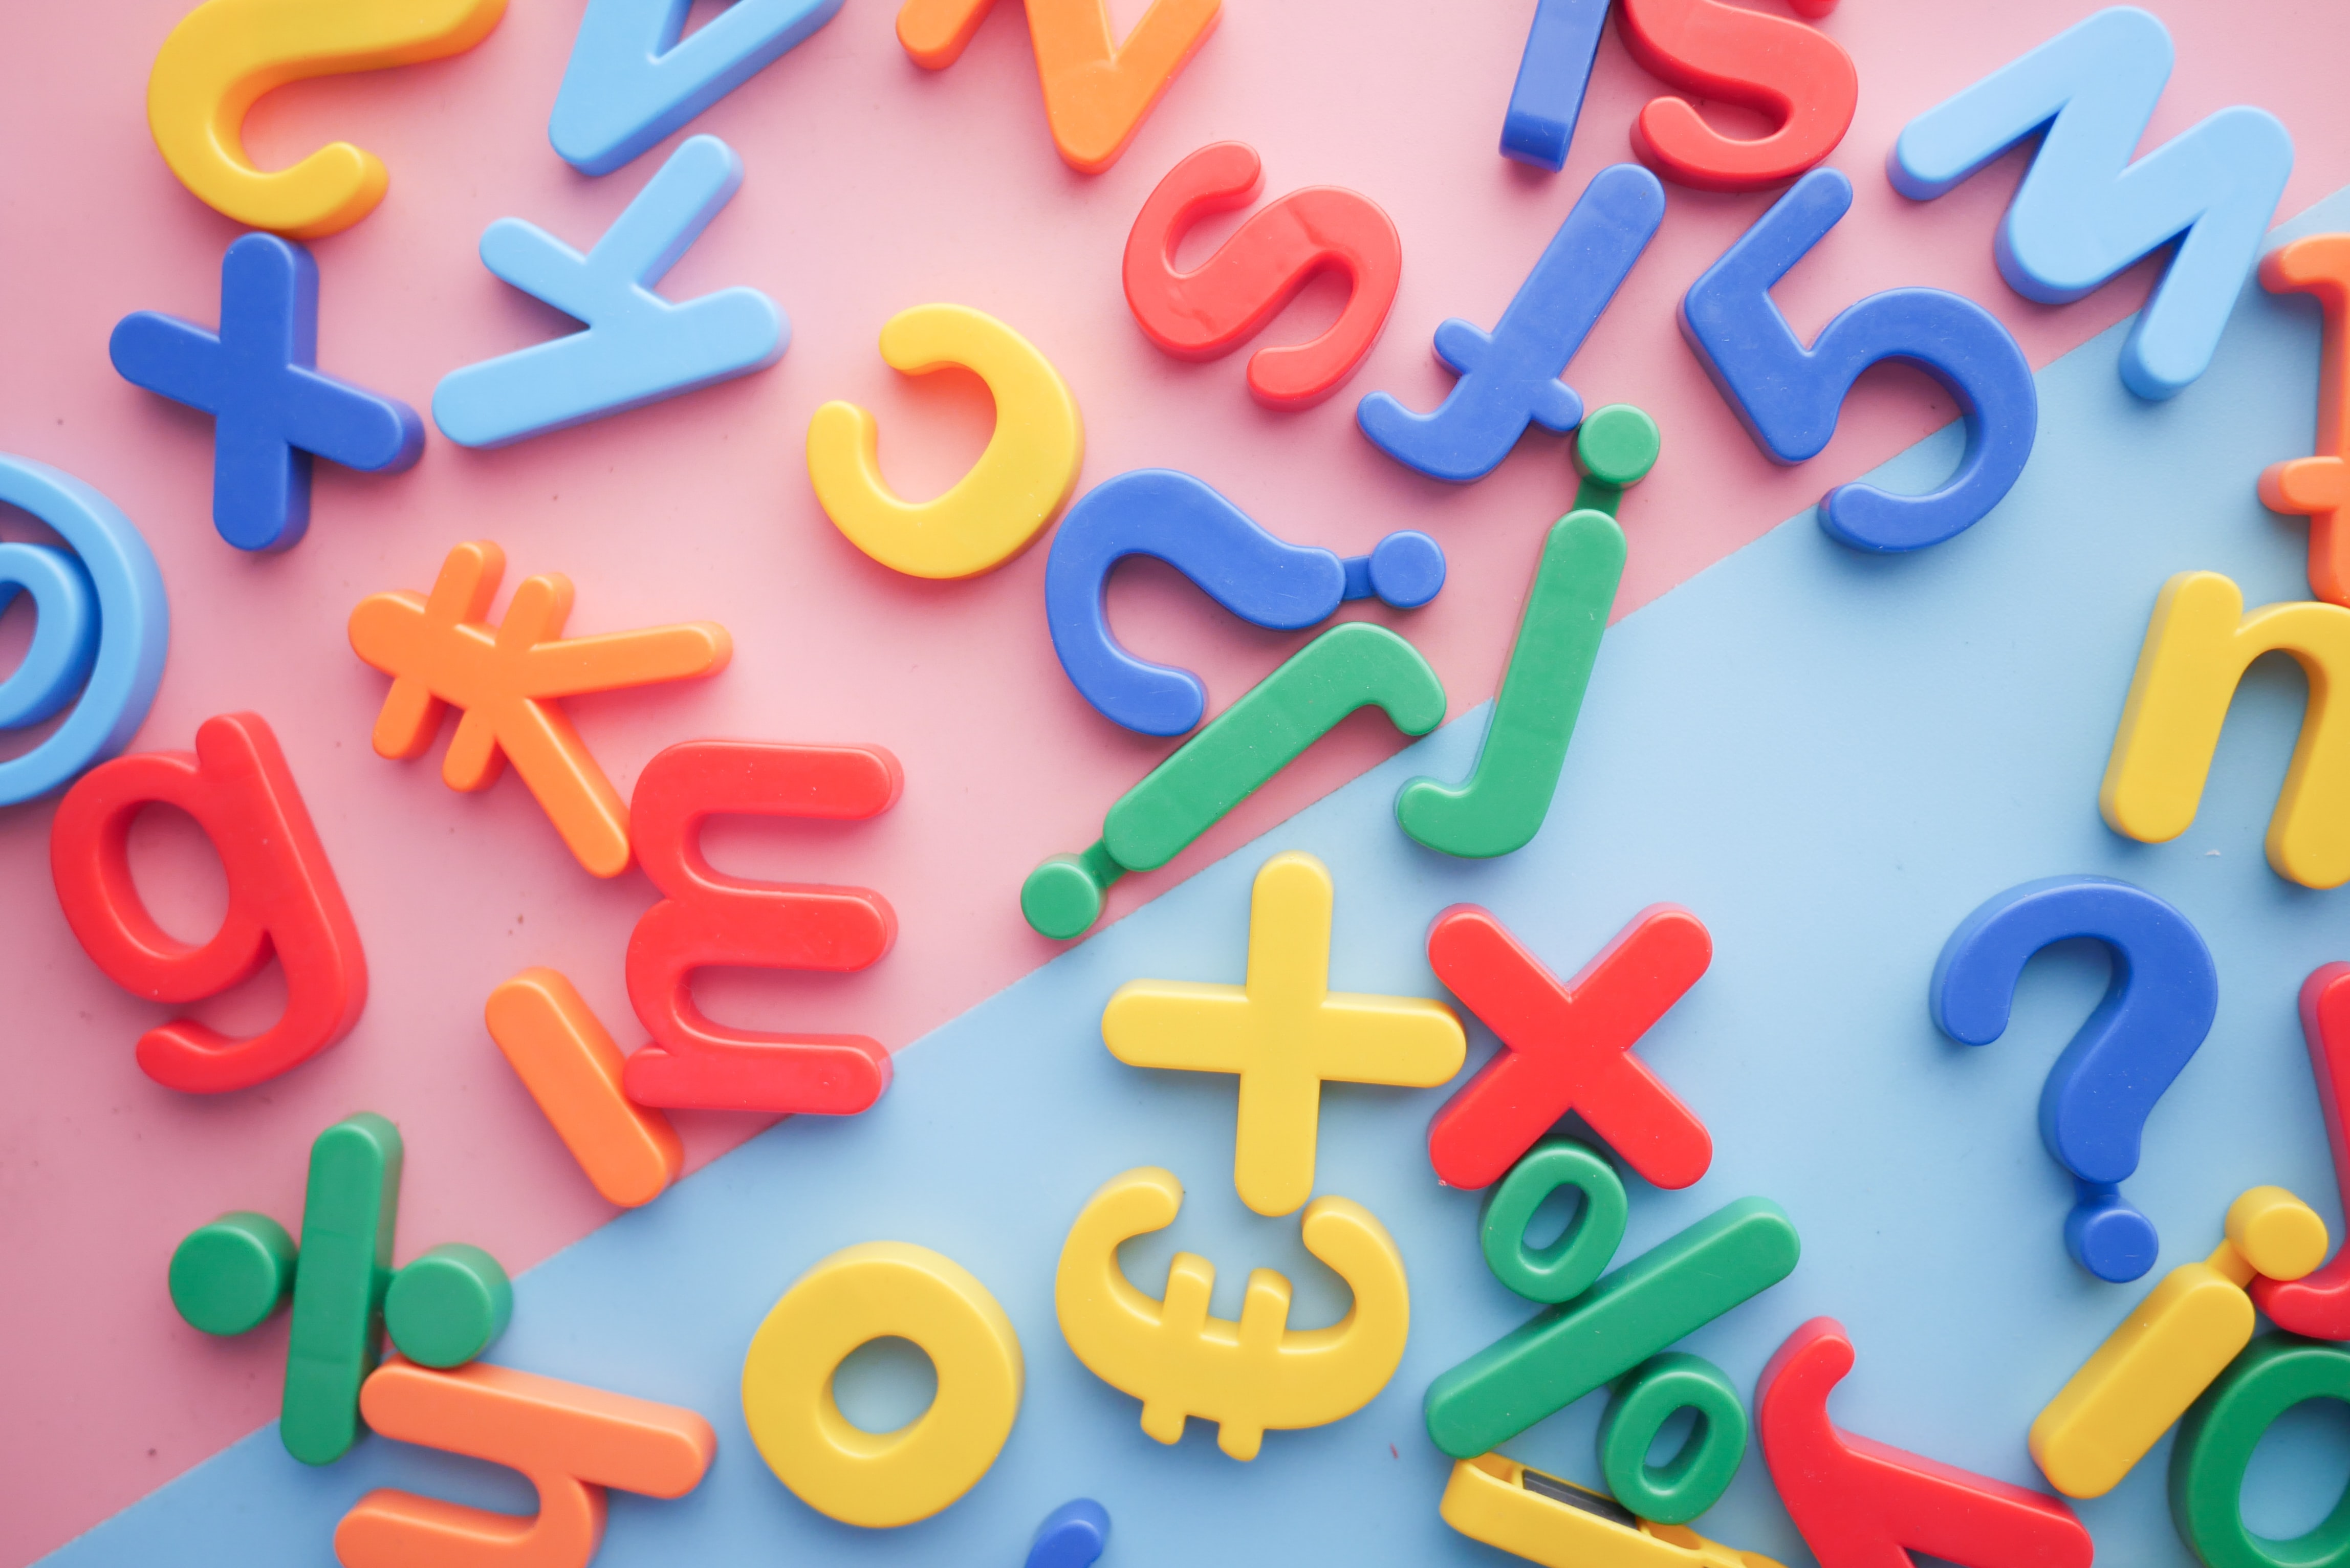 Coloured fridge magnets of letters - Are you copy writing or copywriting - Copify blog 1